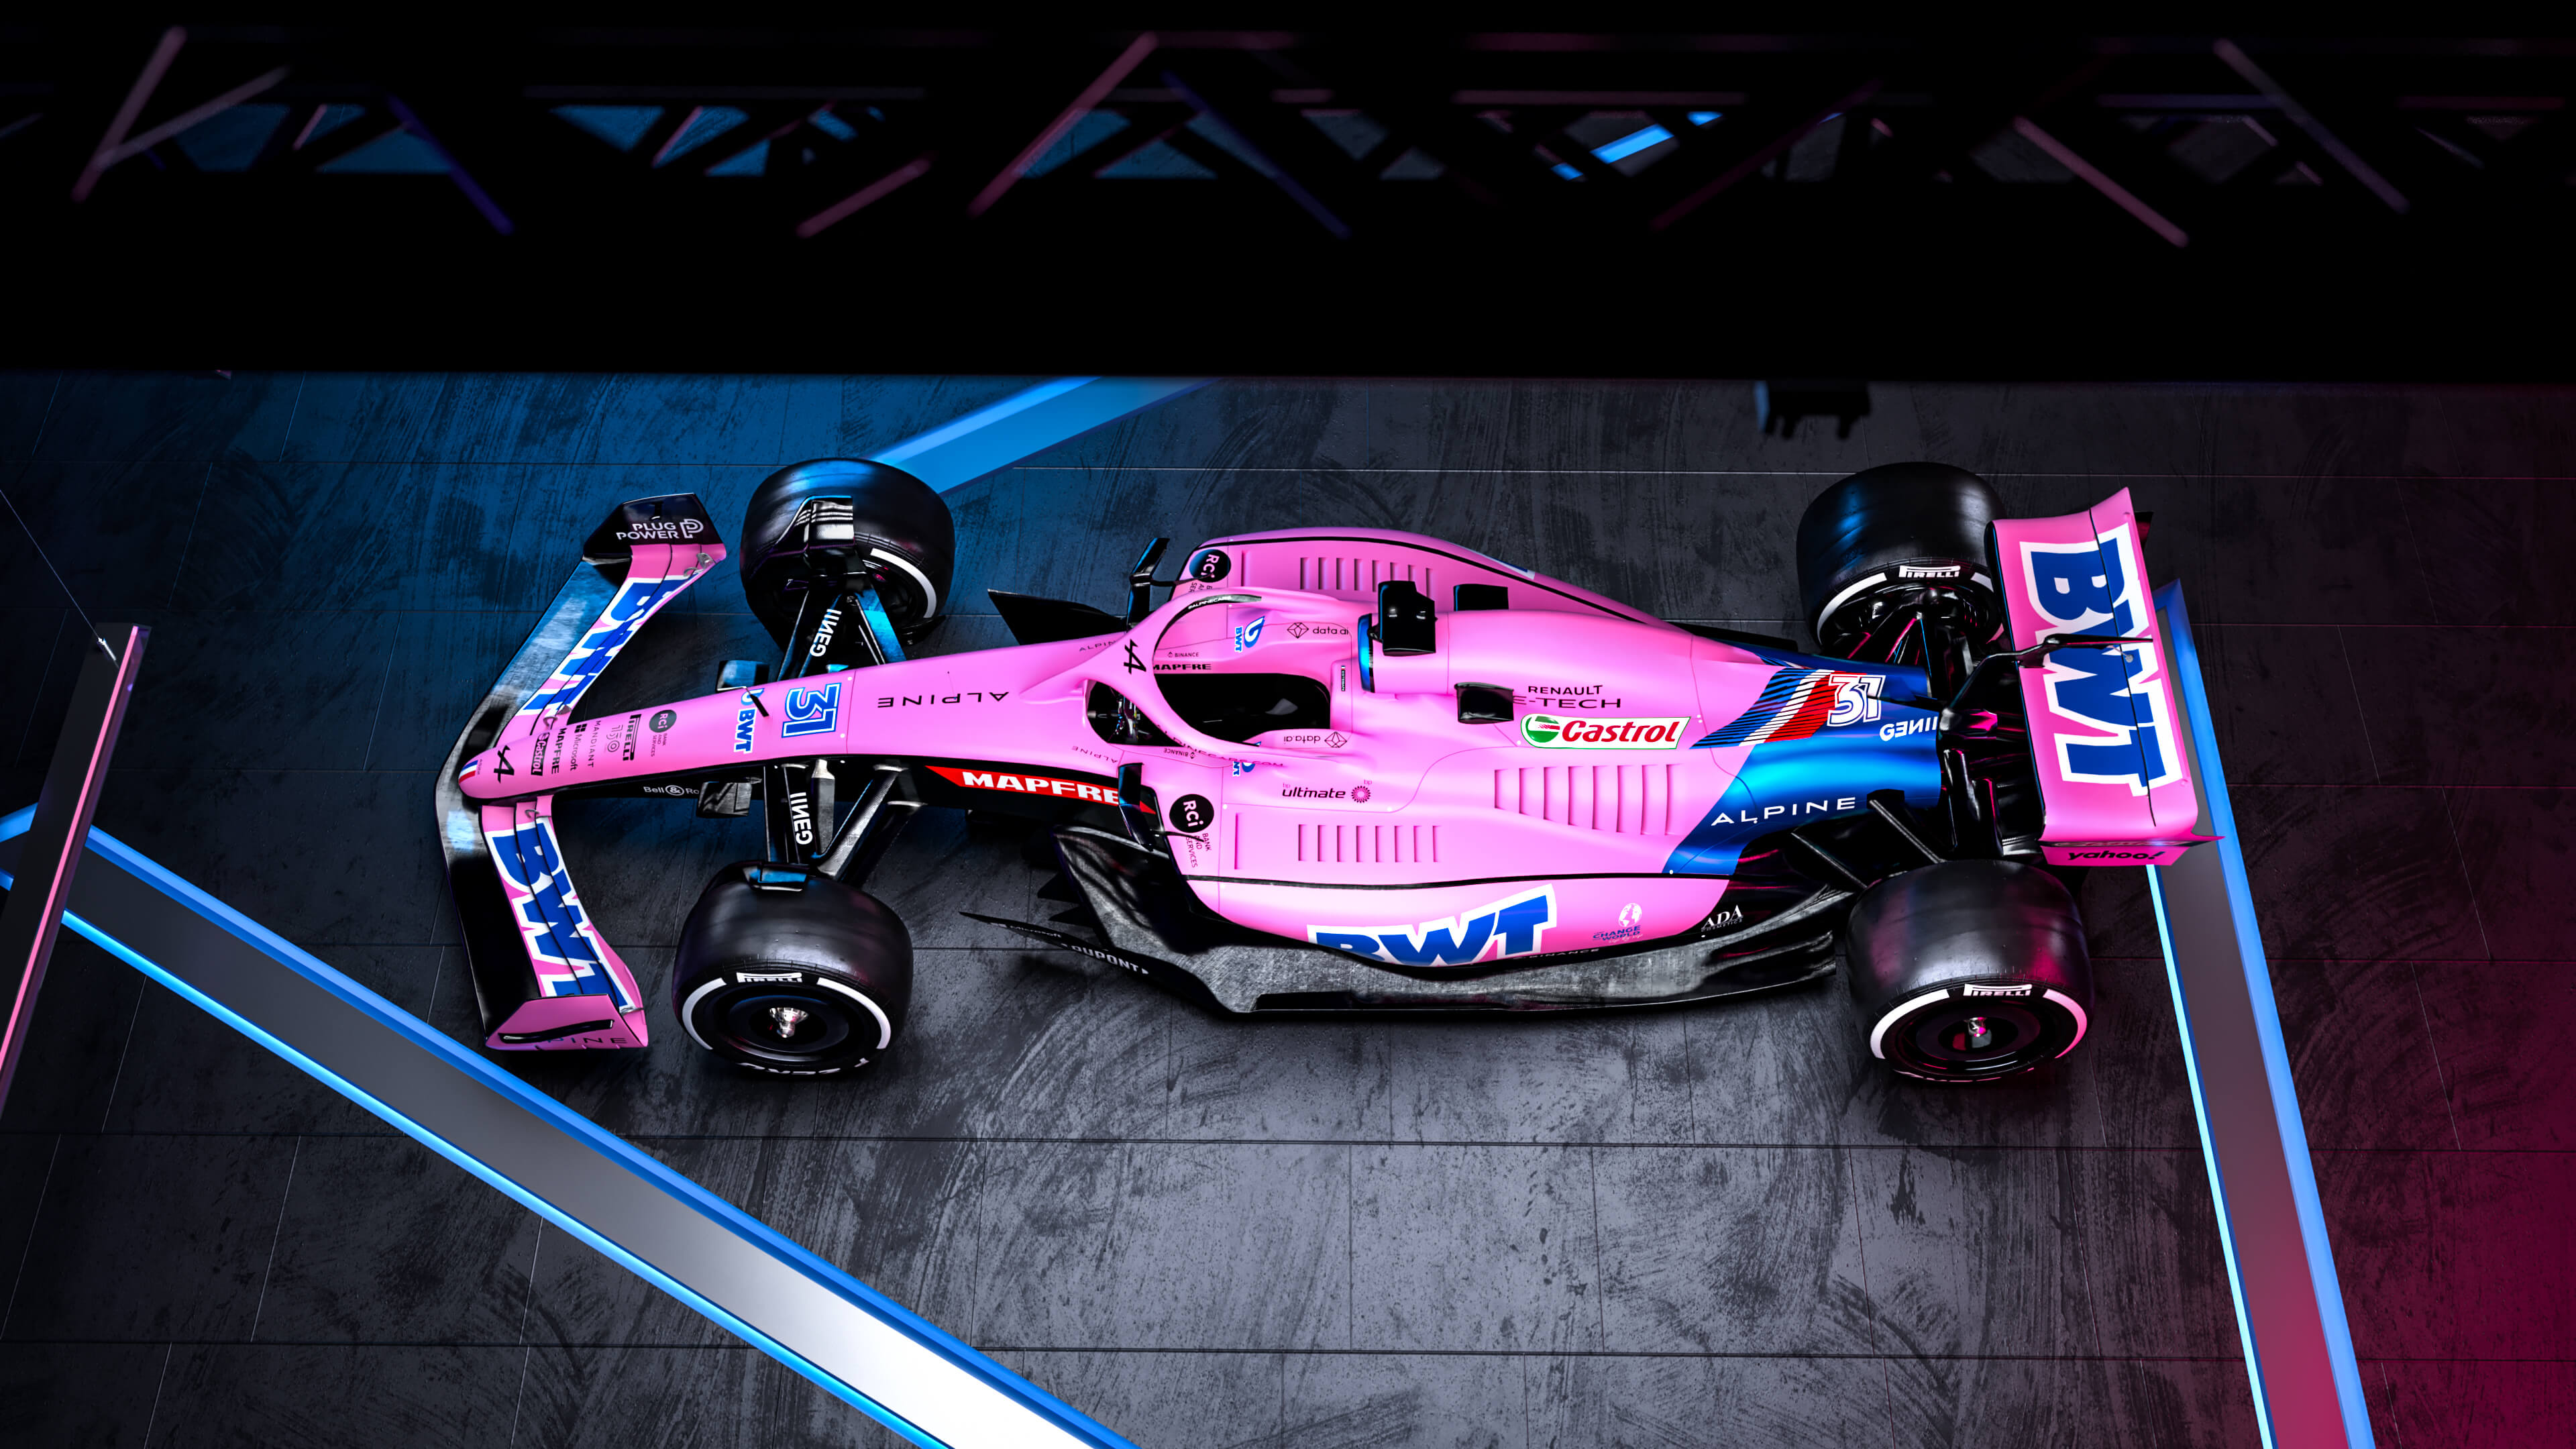 2022 - BWT Alpine F1 Team - Launch A522 - Pink single seater (3)